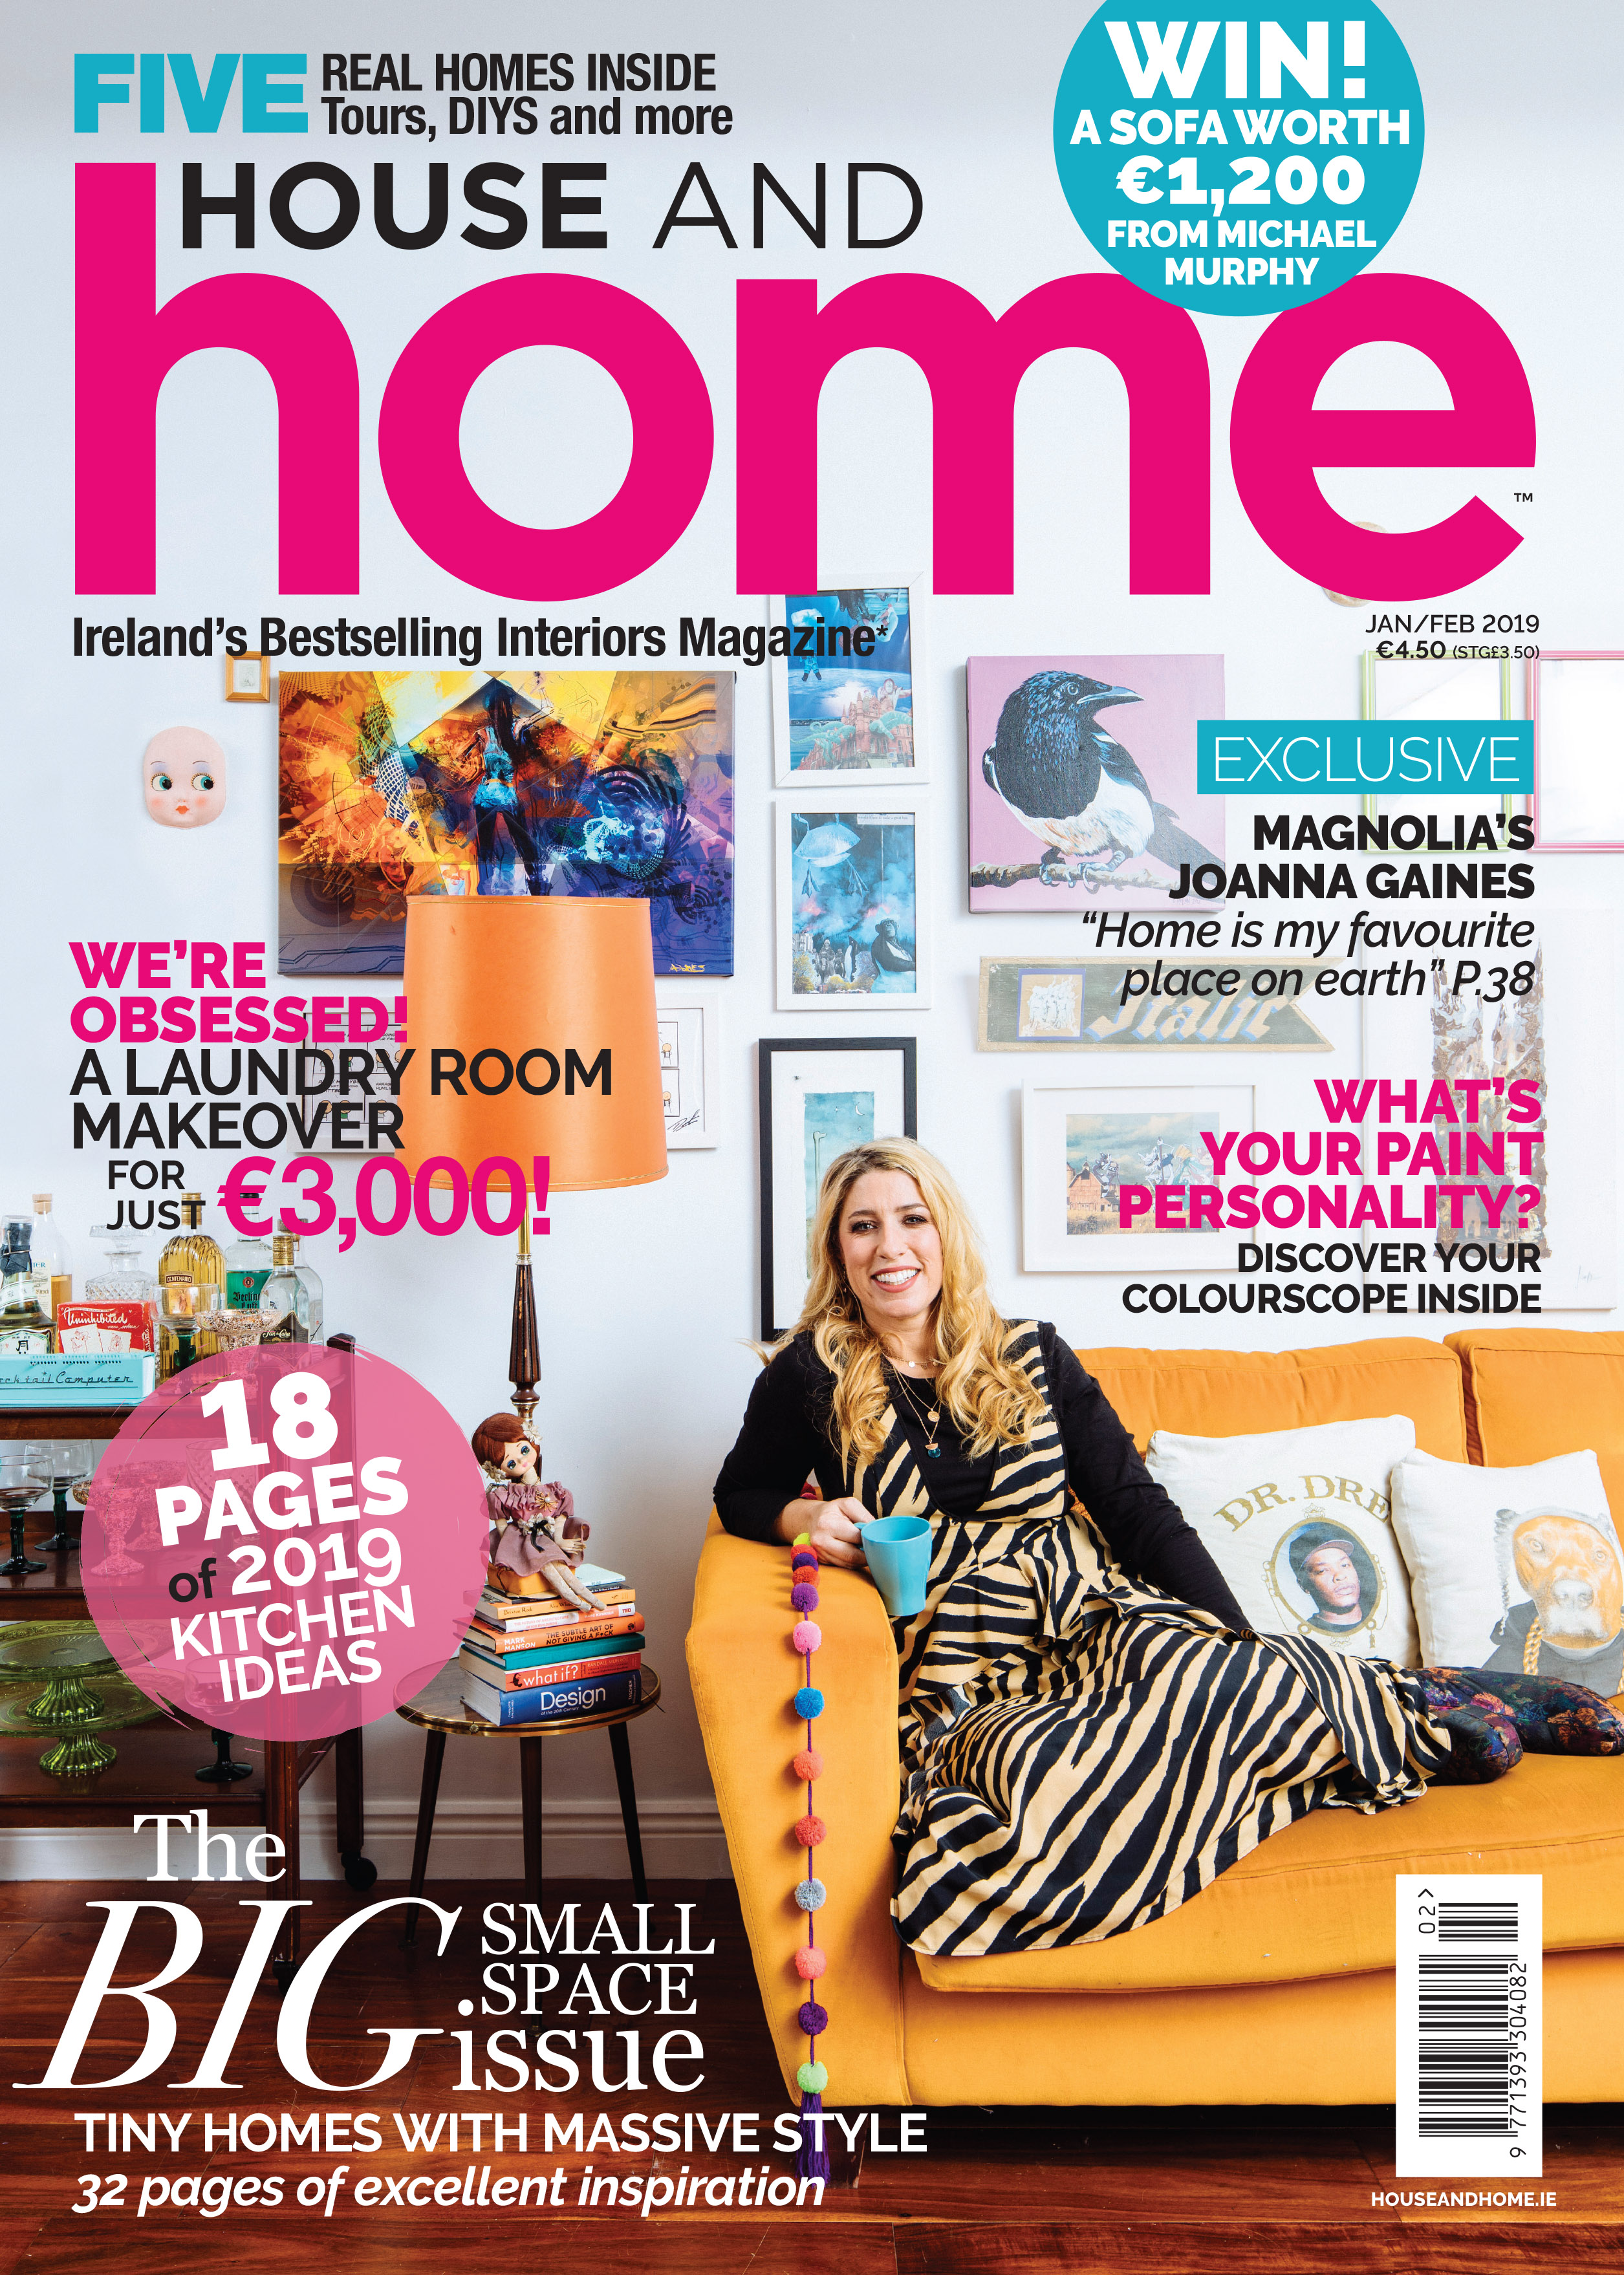 7 Essentials From The Janfeb 2019 Issue Of House And Home Magazine Houseandhomeie